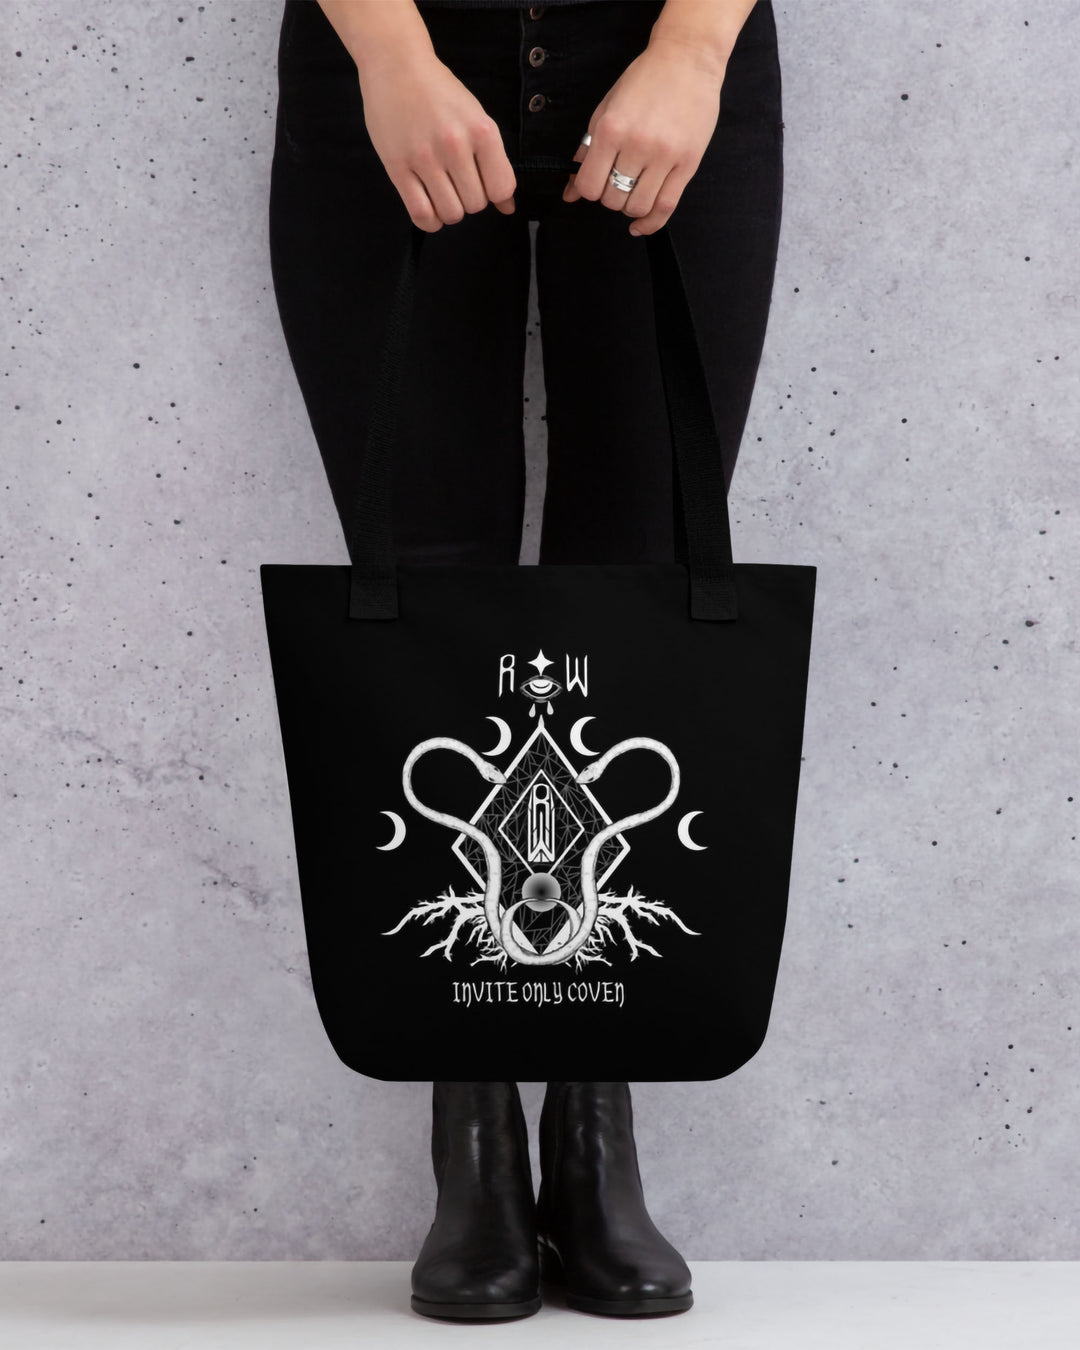 Coven Tote Bag - Vegan Bag for Women Large Foldable Bag Work Gym Travel Shopping Grocery Goth Accessories